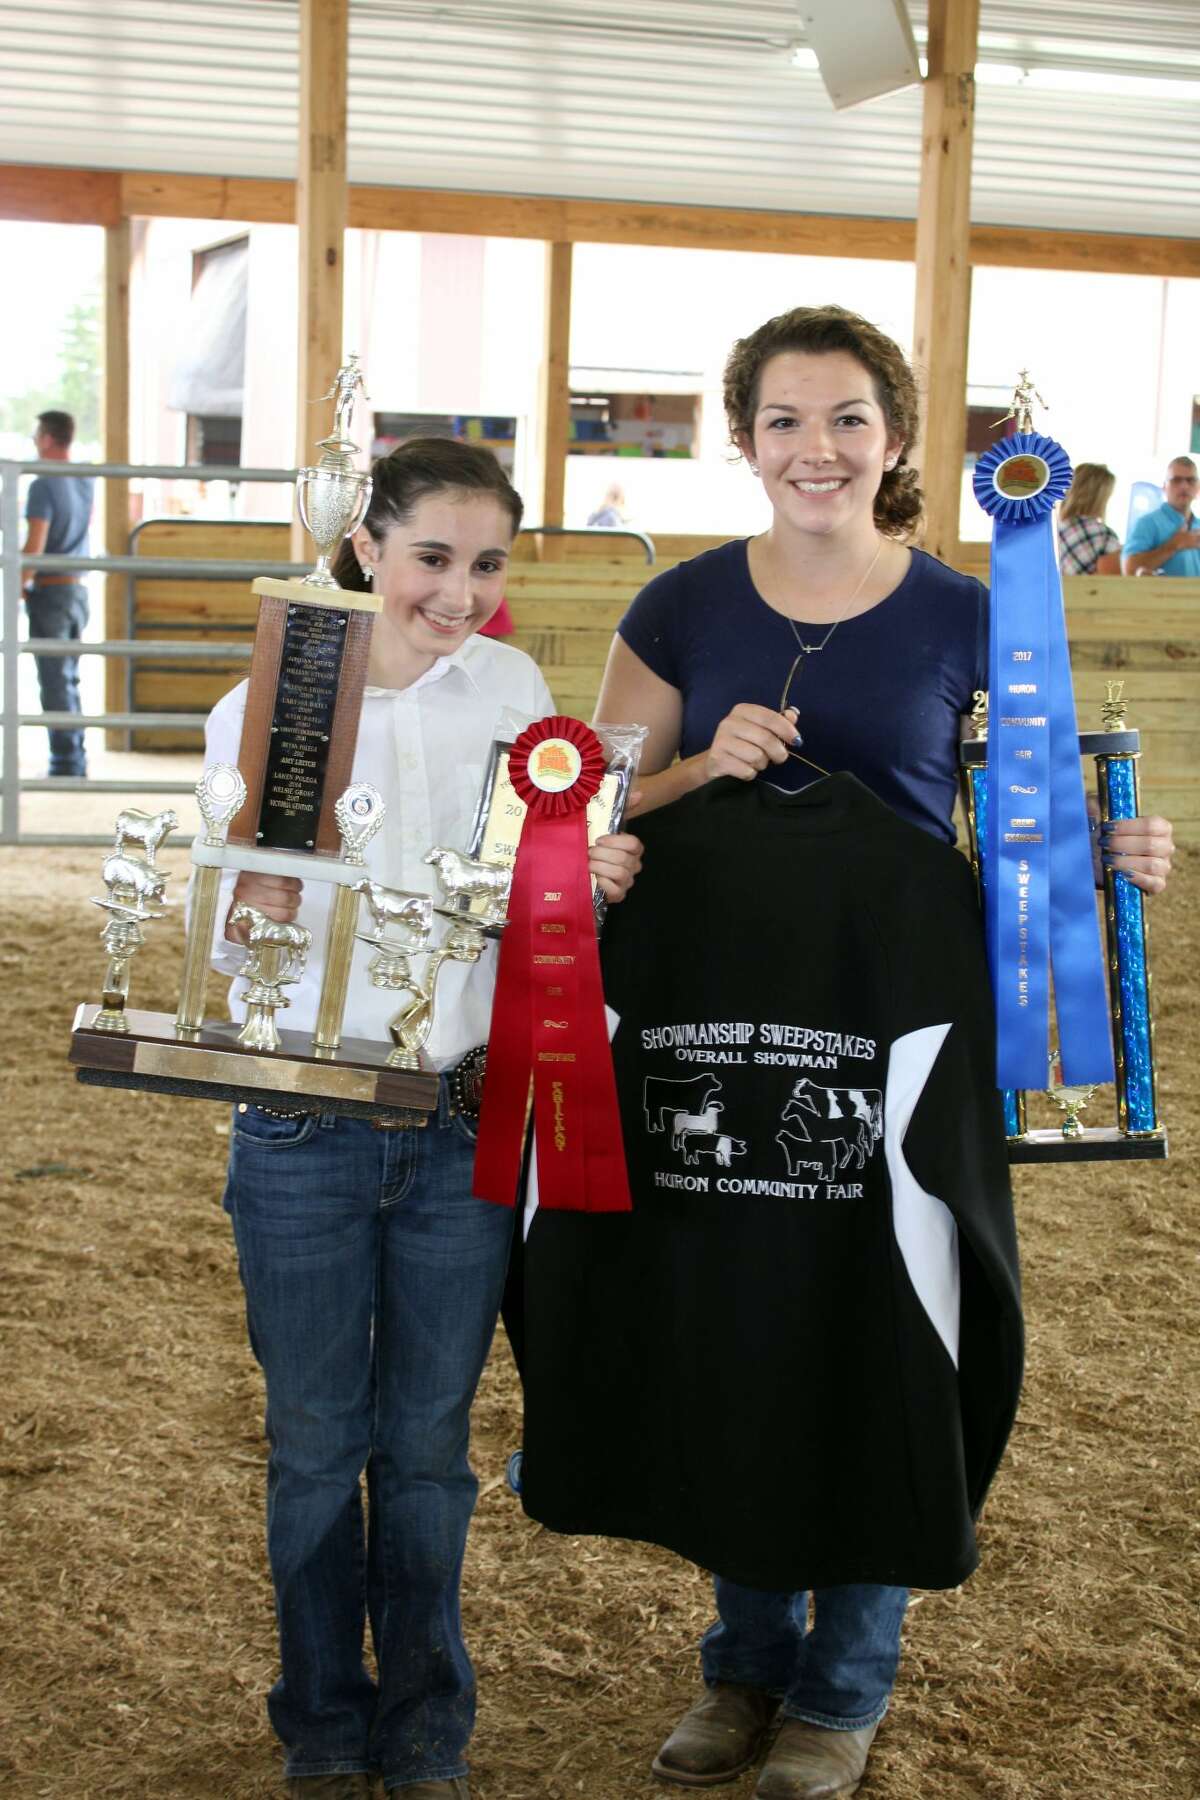 The 4-H and FFA portion of the Huron Community Fair wrapped up Saturday afternoon with the Junior Livestock Association Sweepstakes contest. Dalaney Bates, 13, of Sebewaing (hog showperson) defeated Lillian Lentz (horse showperson), Seth Schumacher (sheep showperson), Nolan Murray (prospect steer showperson), Grace Shupe (fat steer showperson) and Tyler Krug, (dairy showperson).